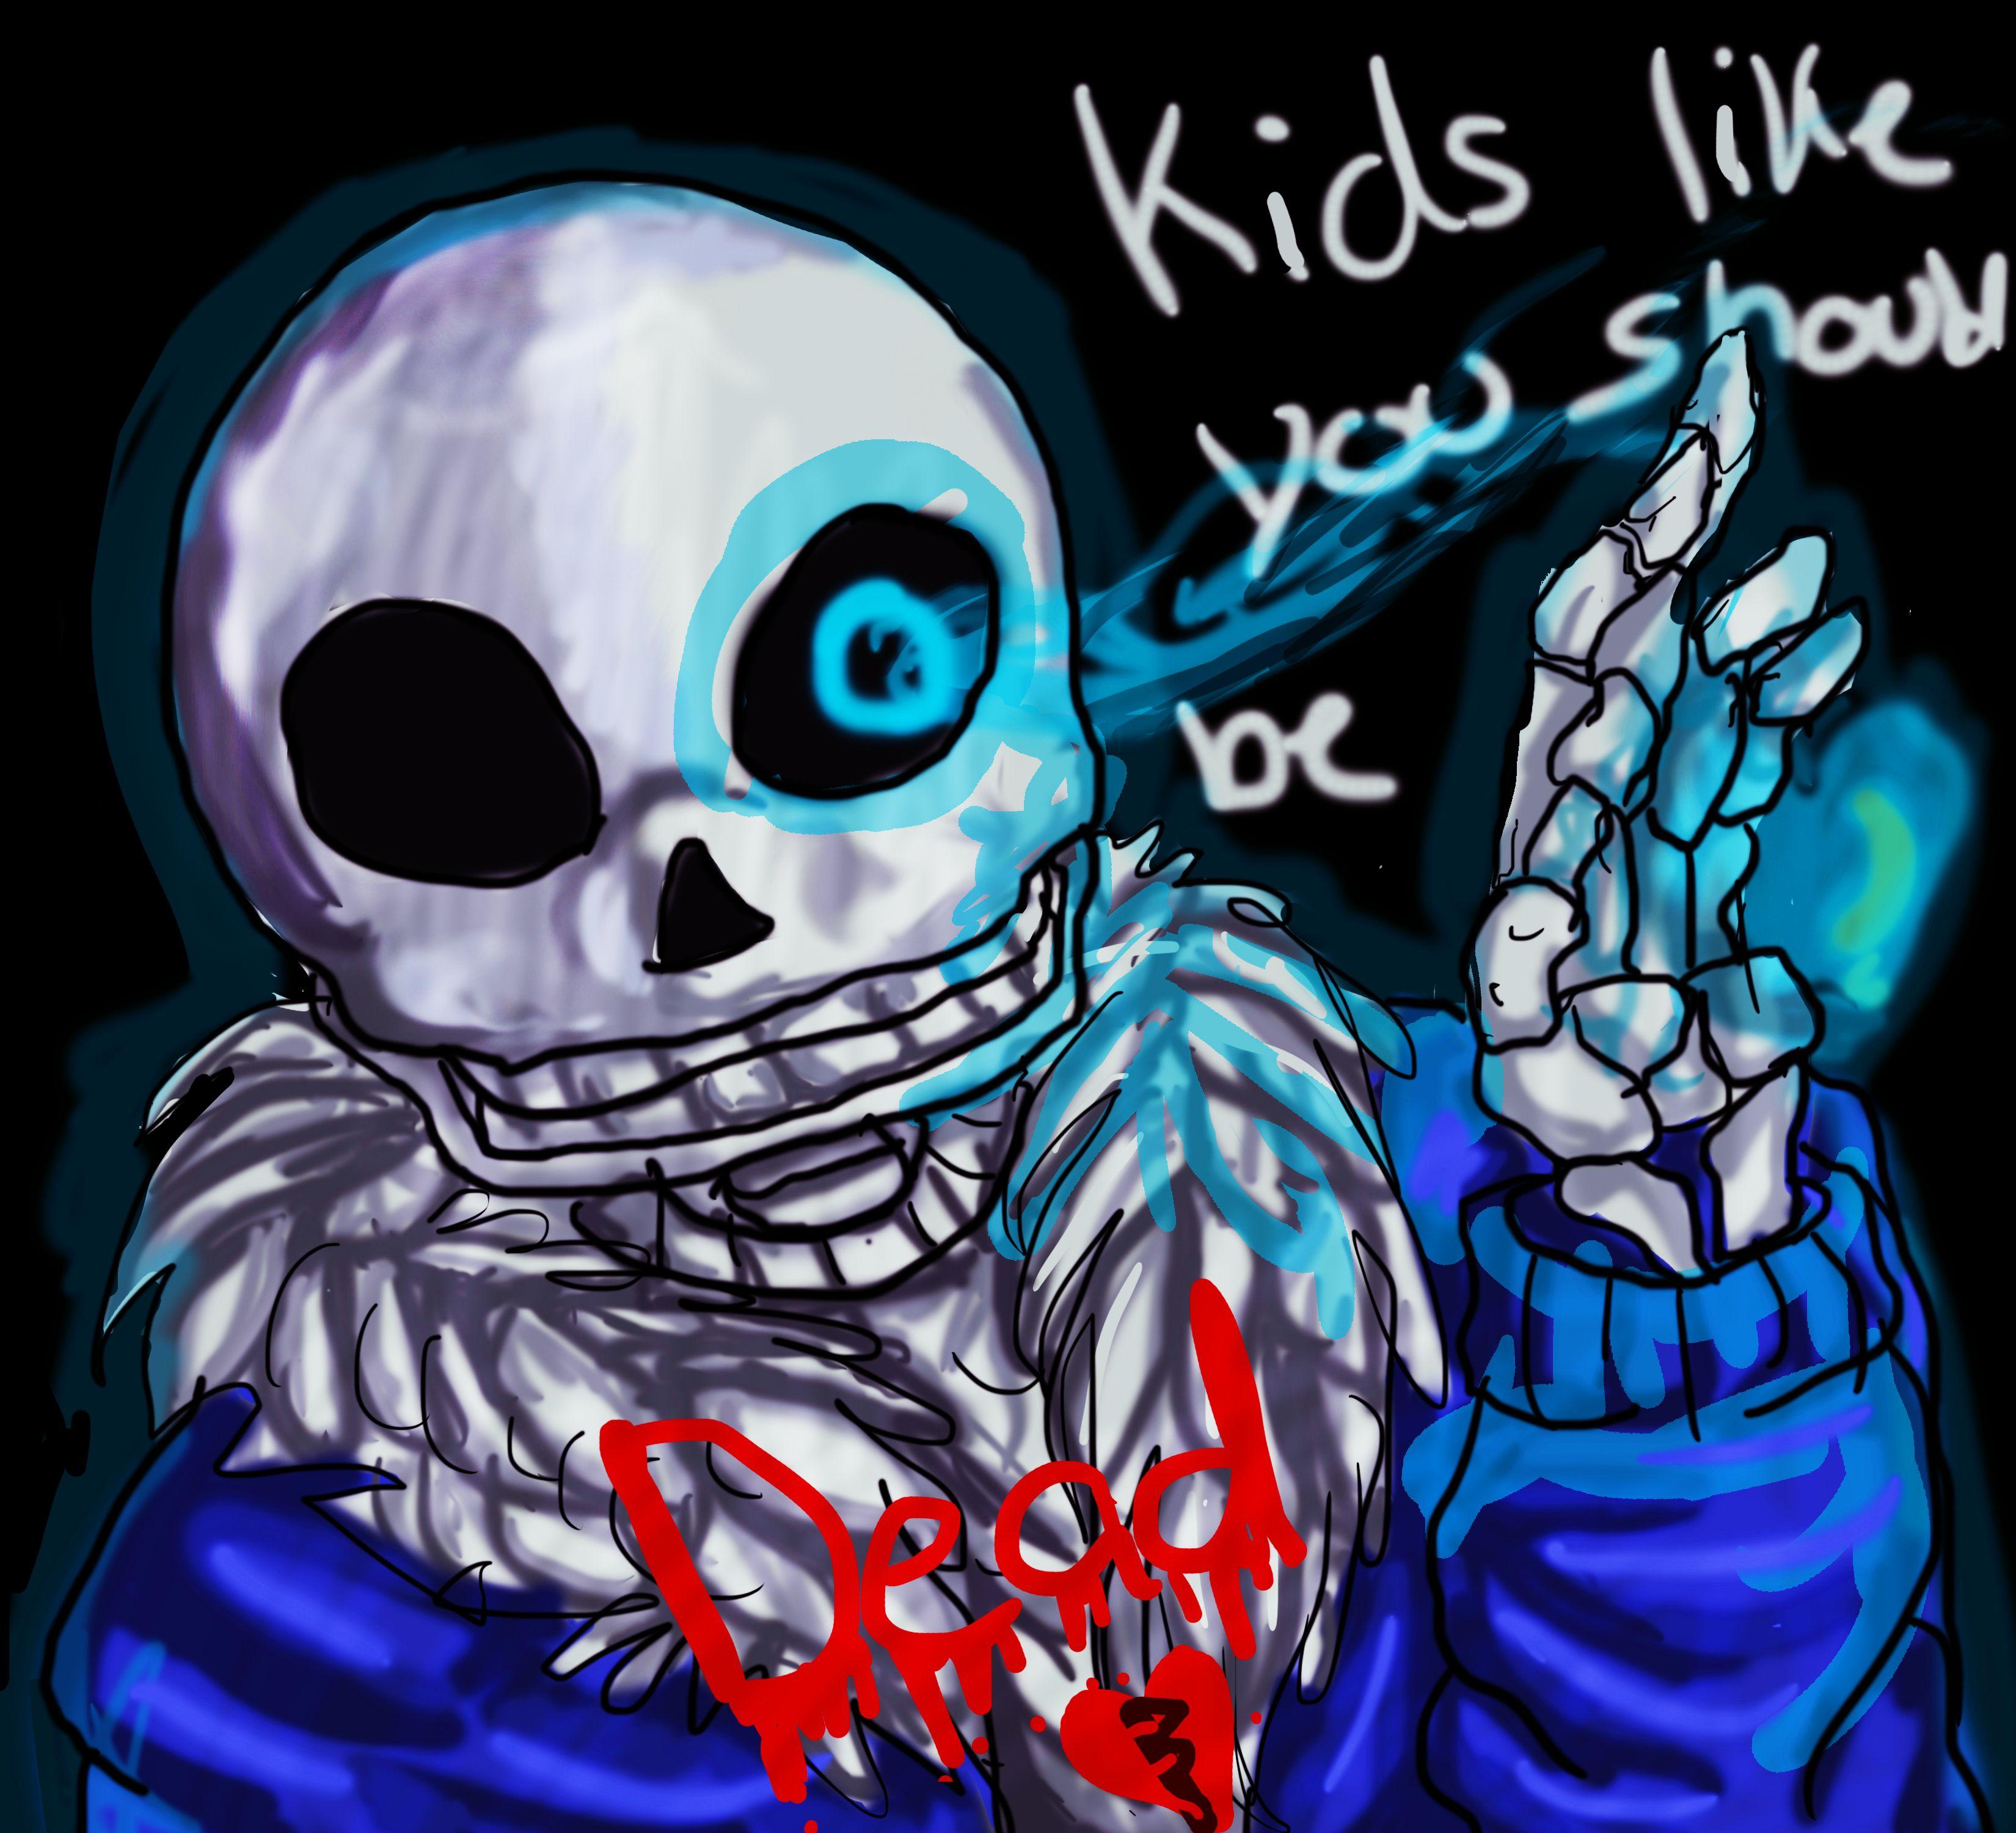 undertale image Kids Like You HD wallpaper and background photo